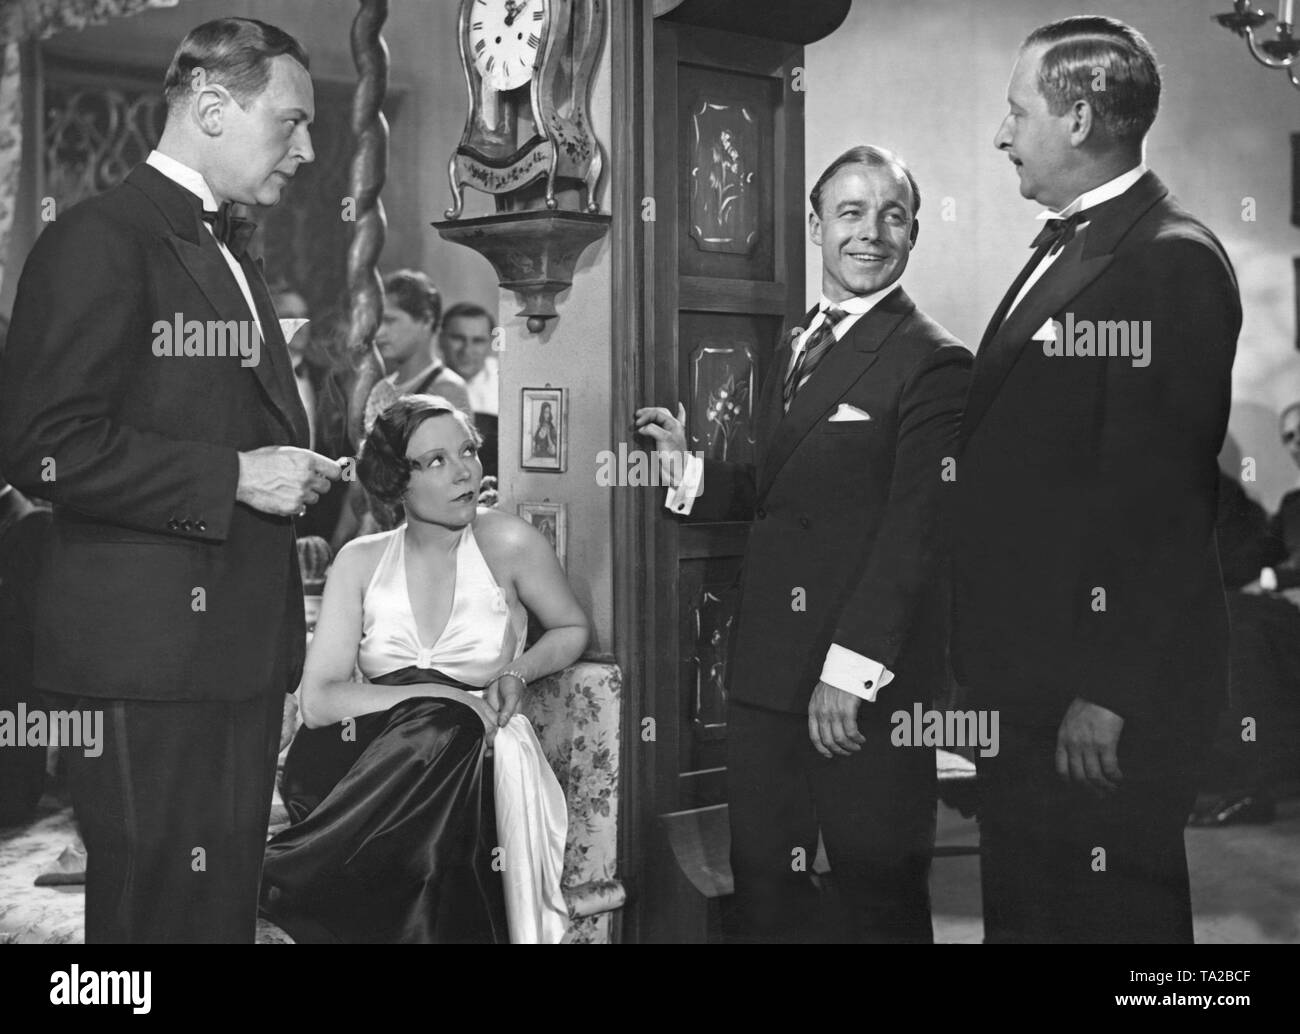 Hans Zesch-Ballot (left), Flockina von Platen as Gina Stern, Heinz Ruehmann as racing cyclist Willy Streblow and Fritz Odemar as attorney Lissmann (right) in the film comedy 'Stroke by the Bill' (German: Strich durch die Rechnung) by Alfred Zeisler. The plot of the film is based on the novel by Fred Antoine Angermayer. Stock Photo